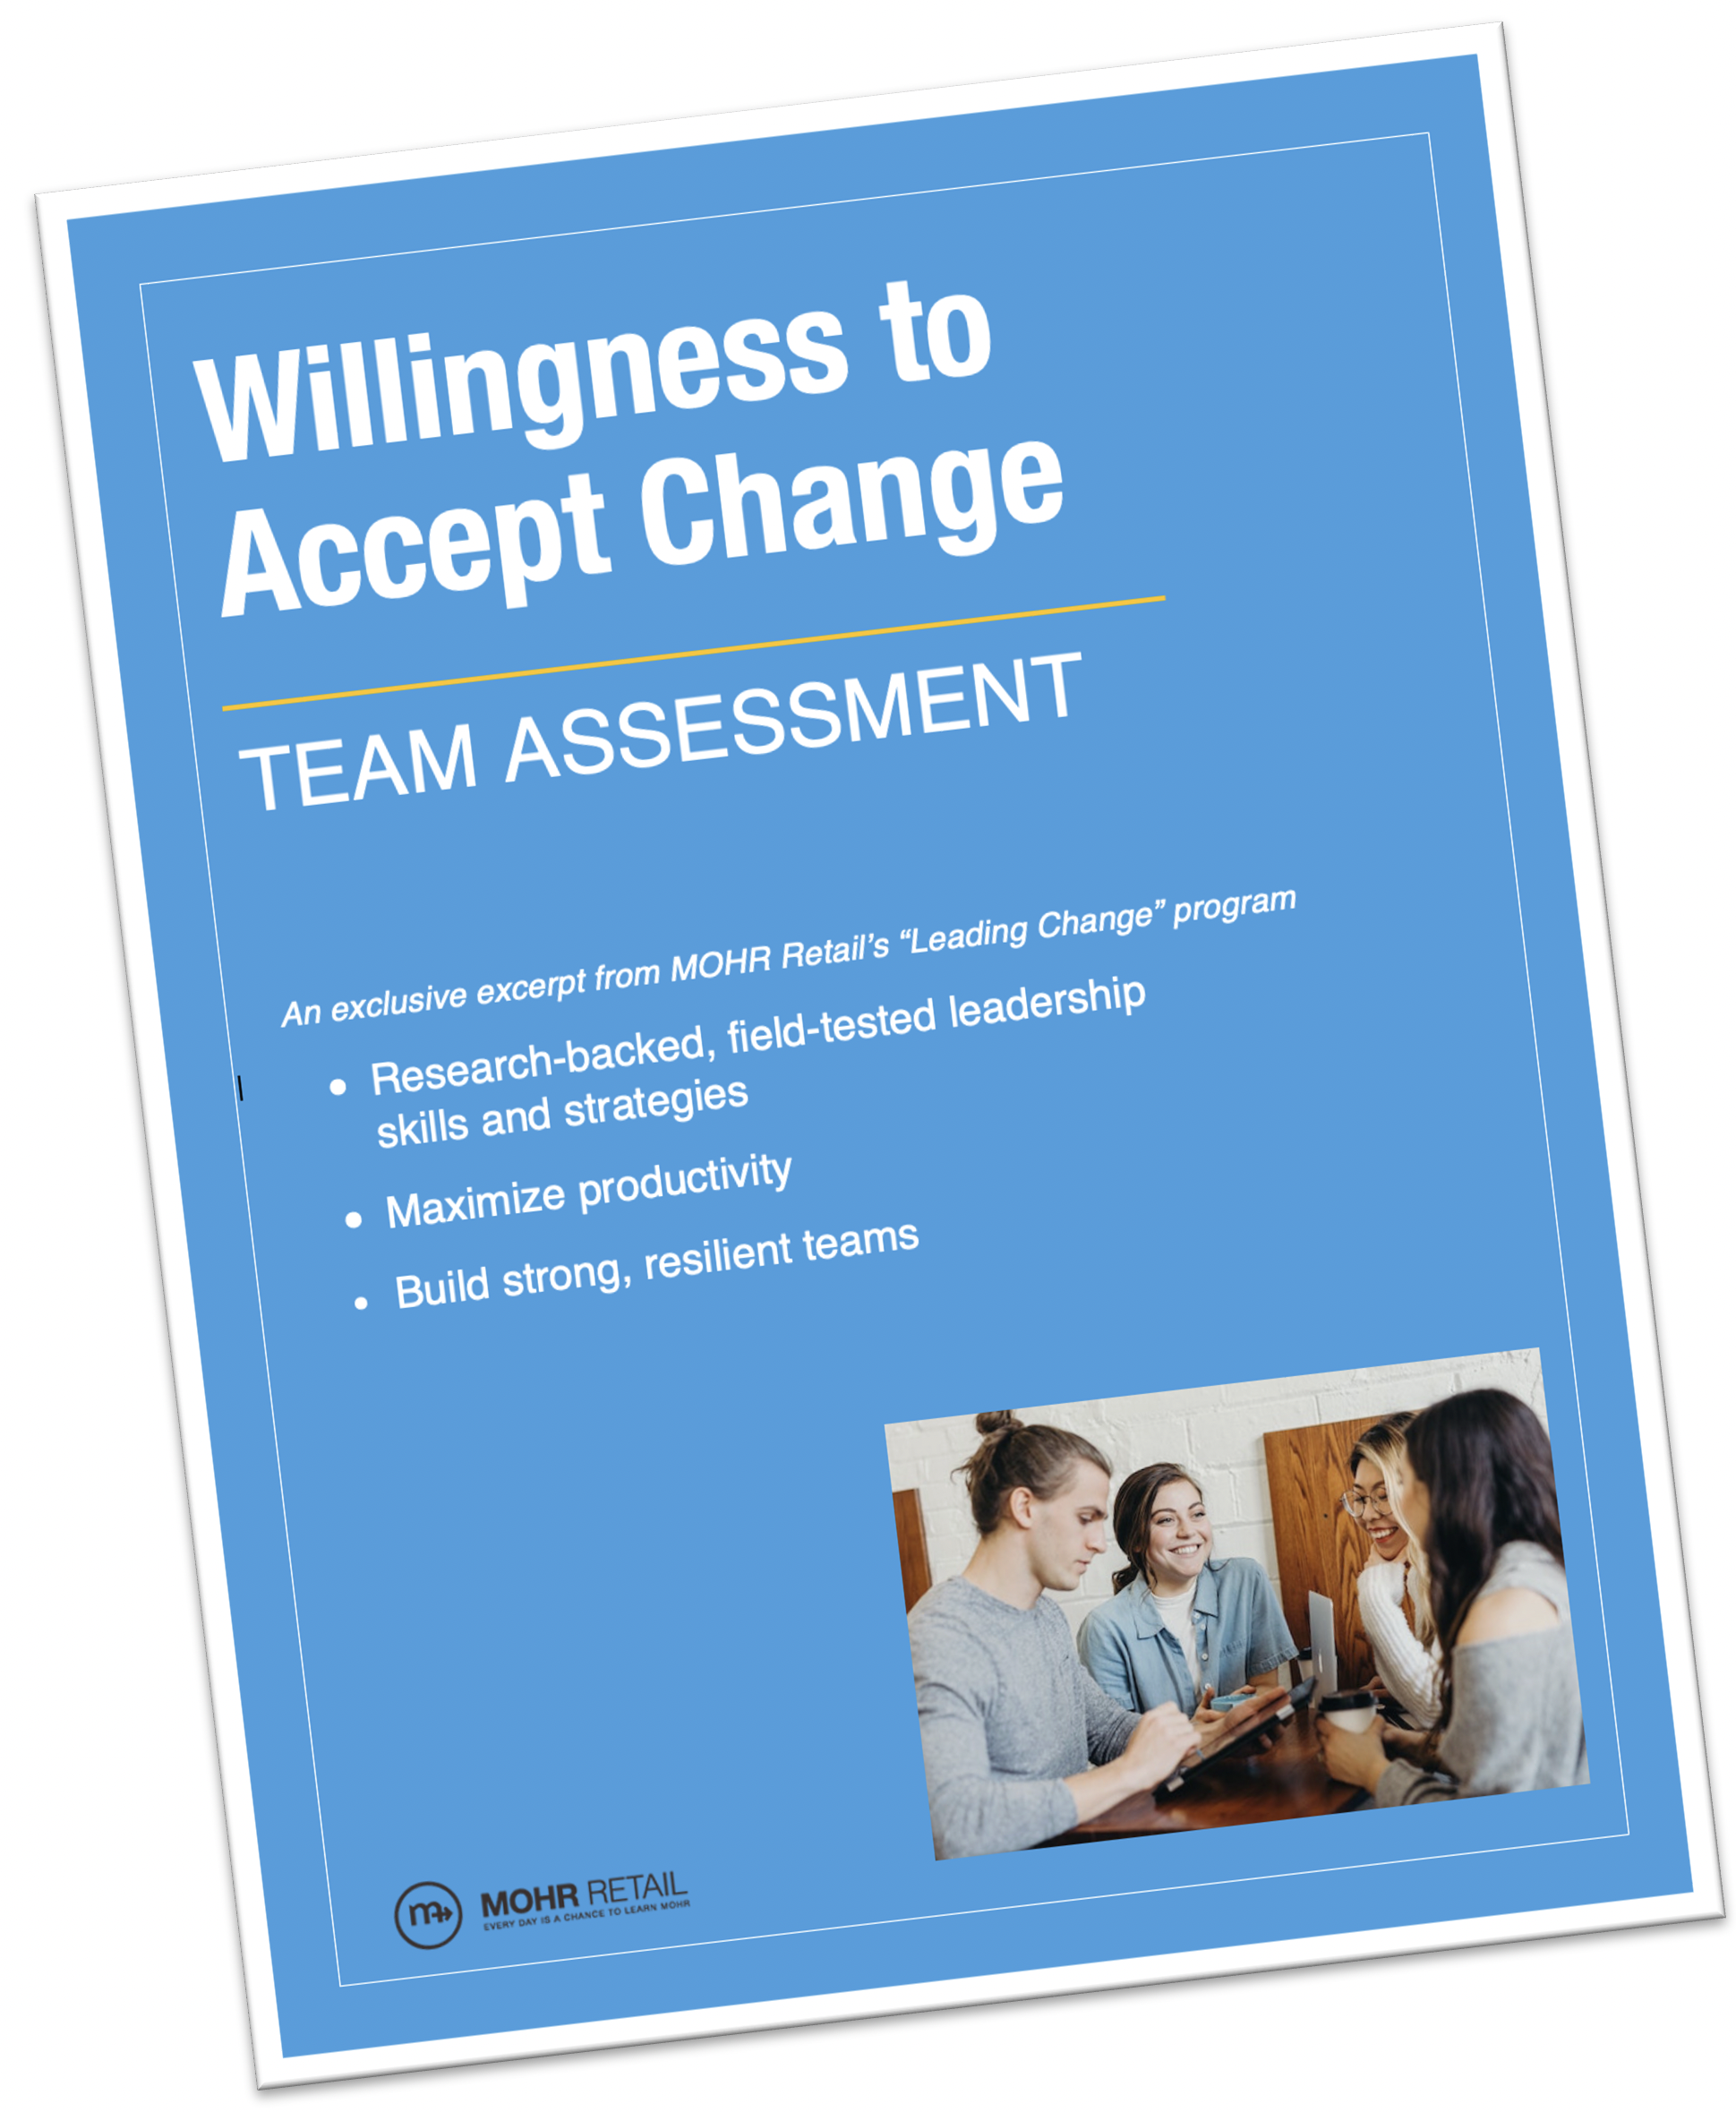 willingness to change team assessment